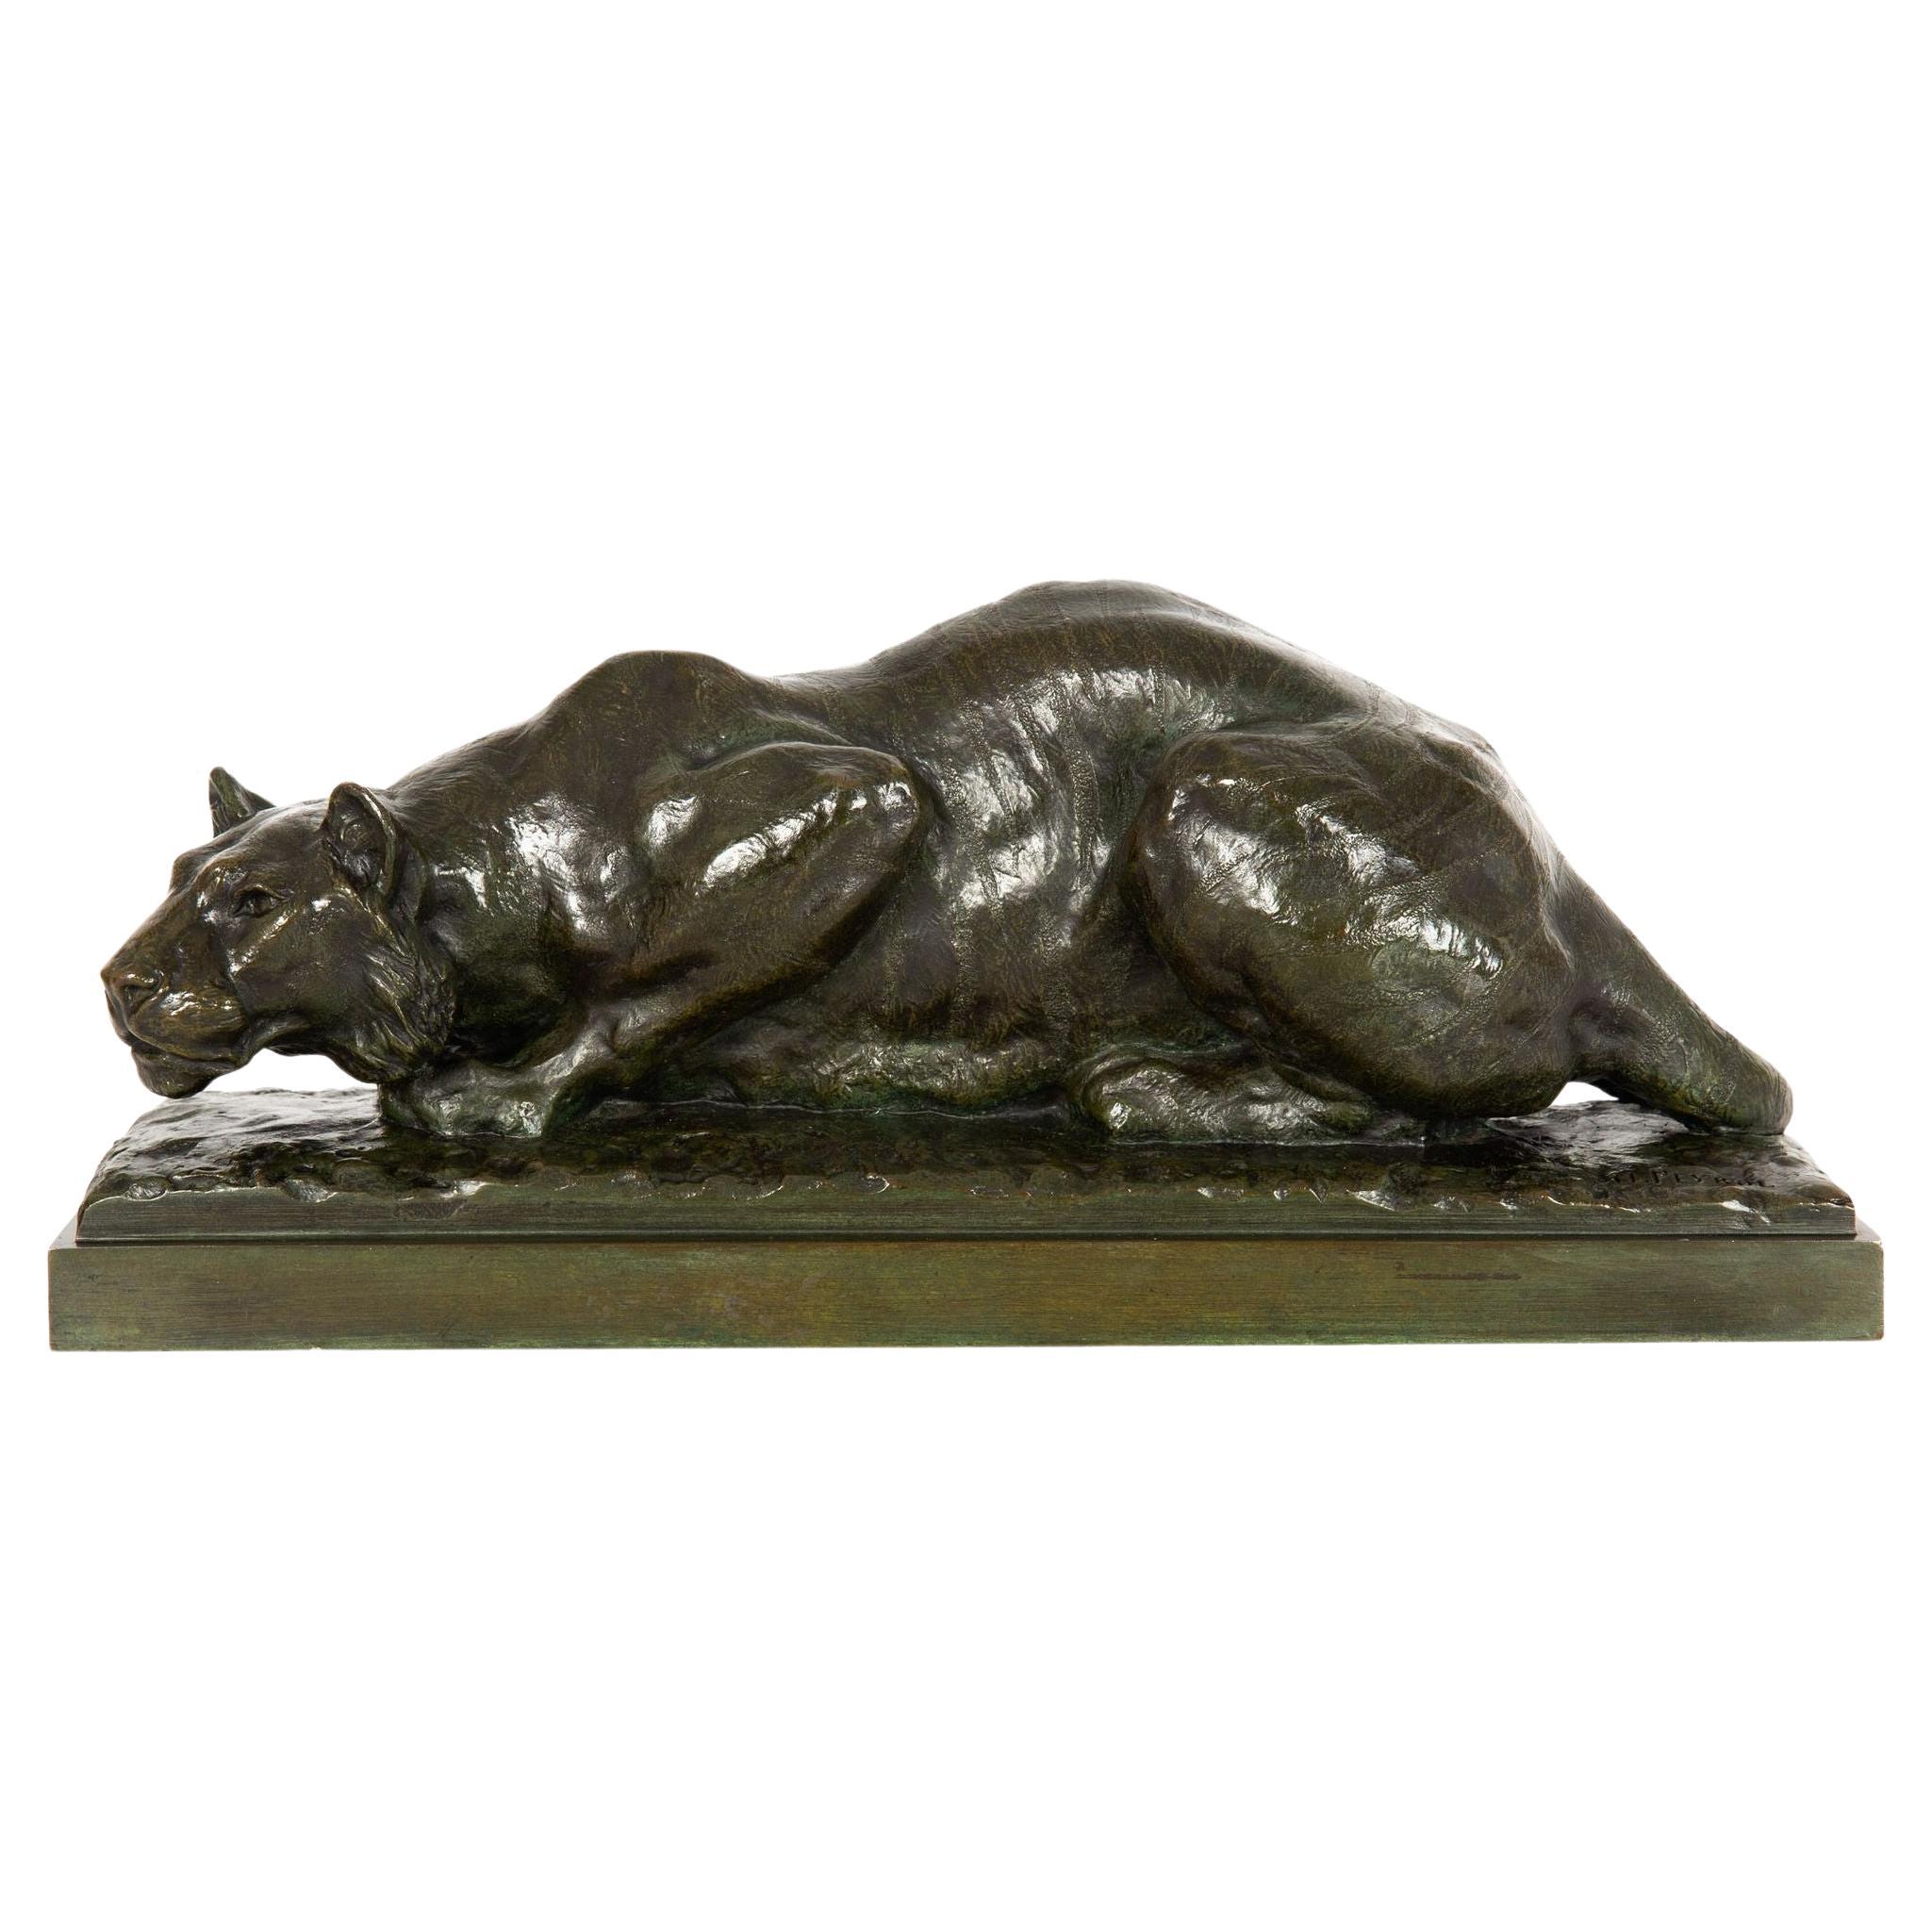 French Bronze Sculpture of Crouching Tiger by François Hippolyte Peyrol